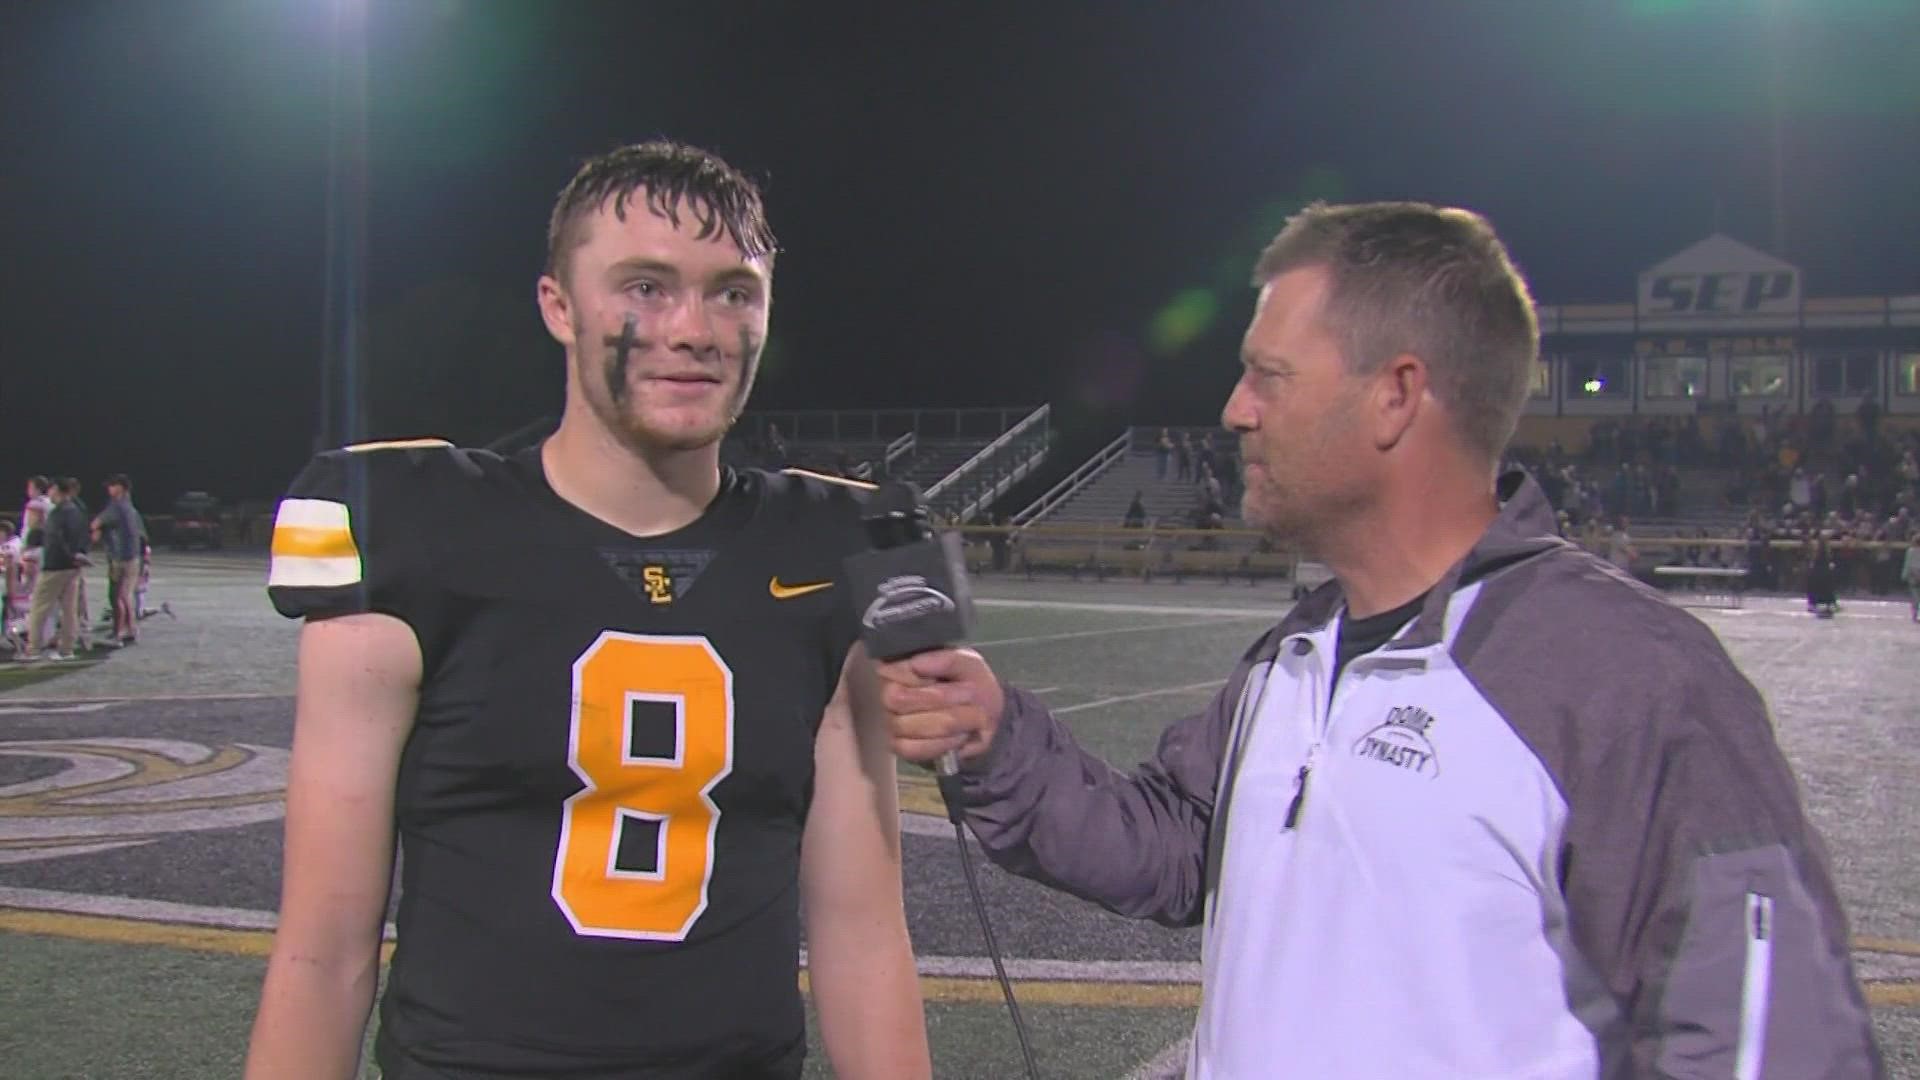 Southeast Polk defeated Valley West 40-21.